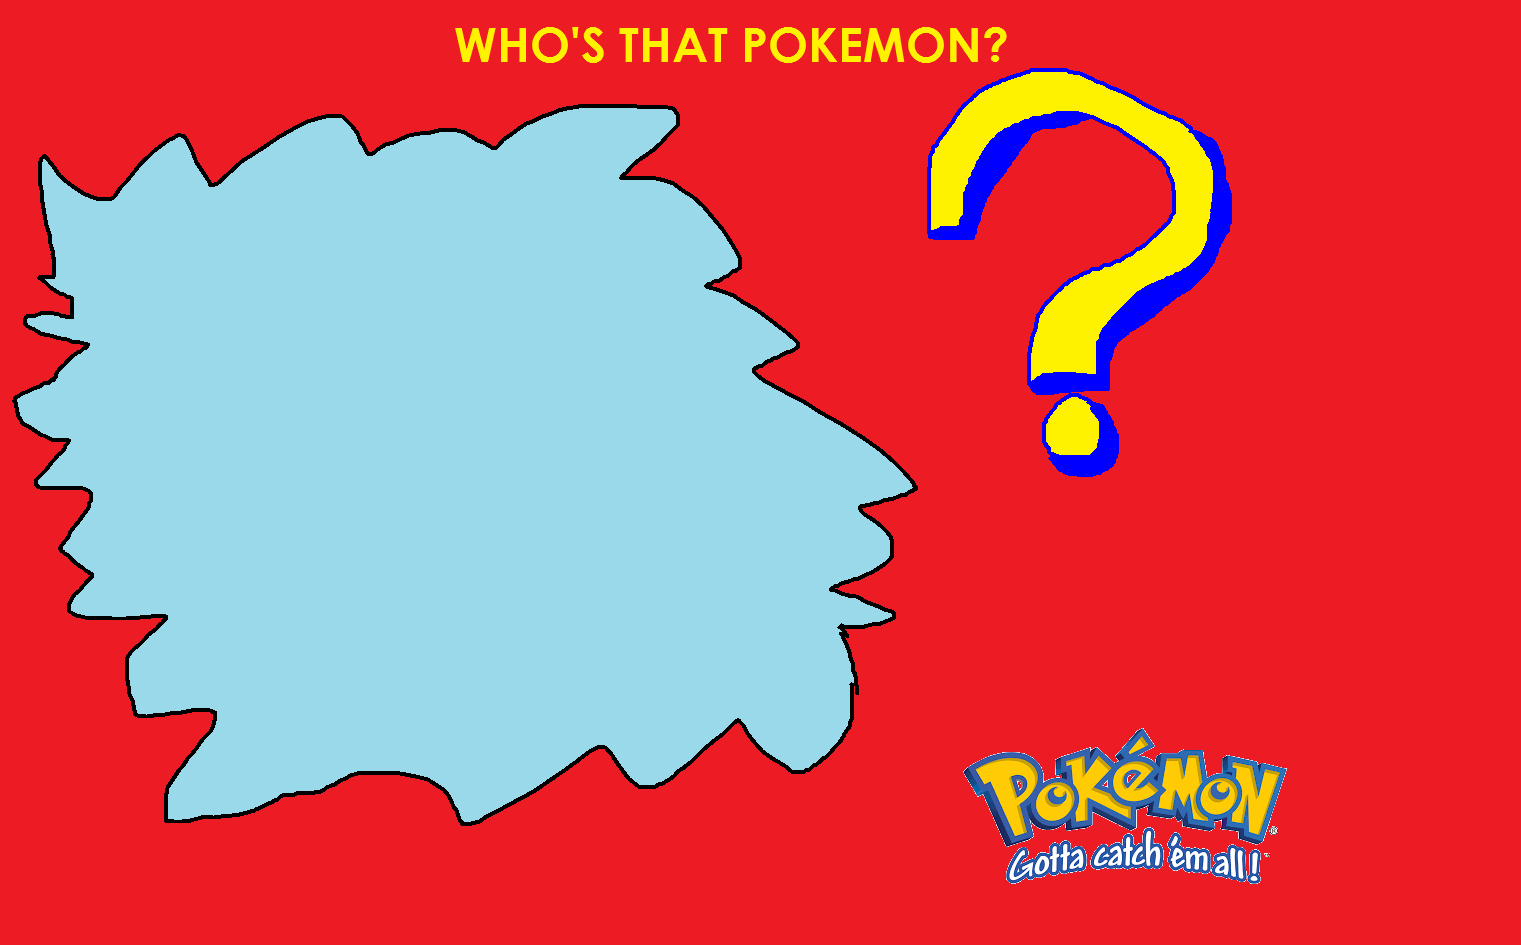 who-s-that-pokemon-template-by-mikejeddynsgamer89-on-deviantart